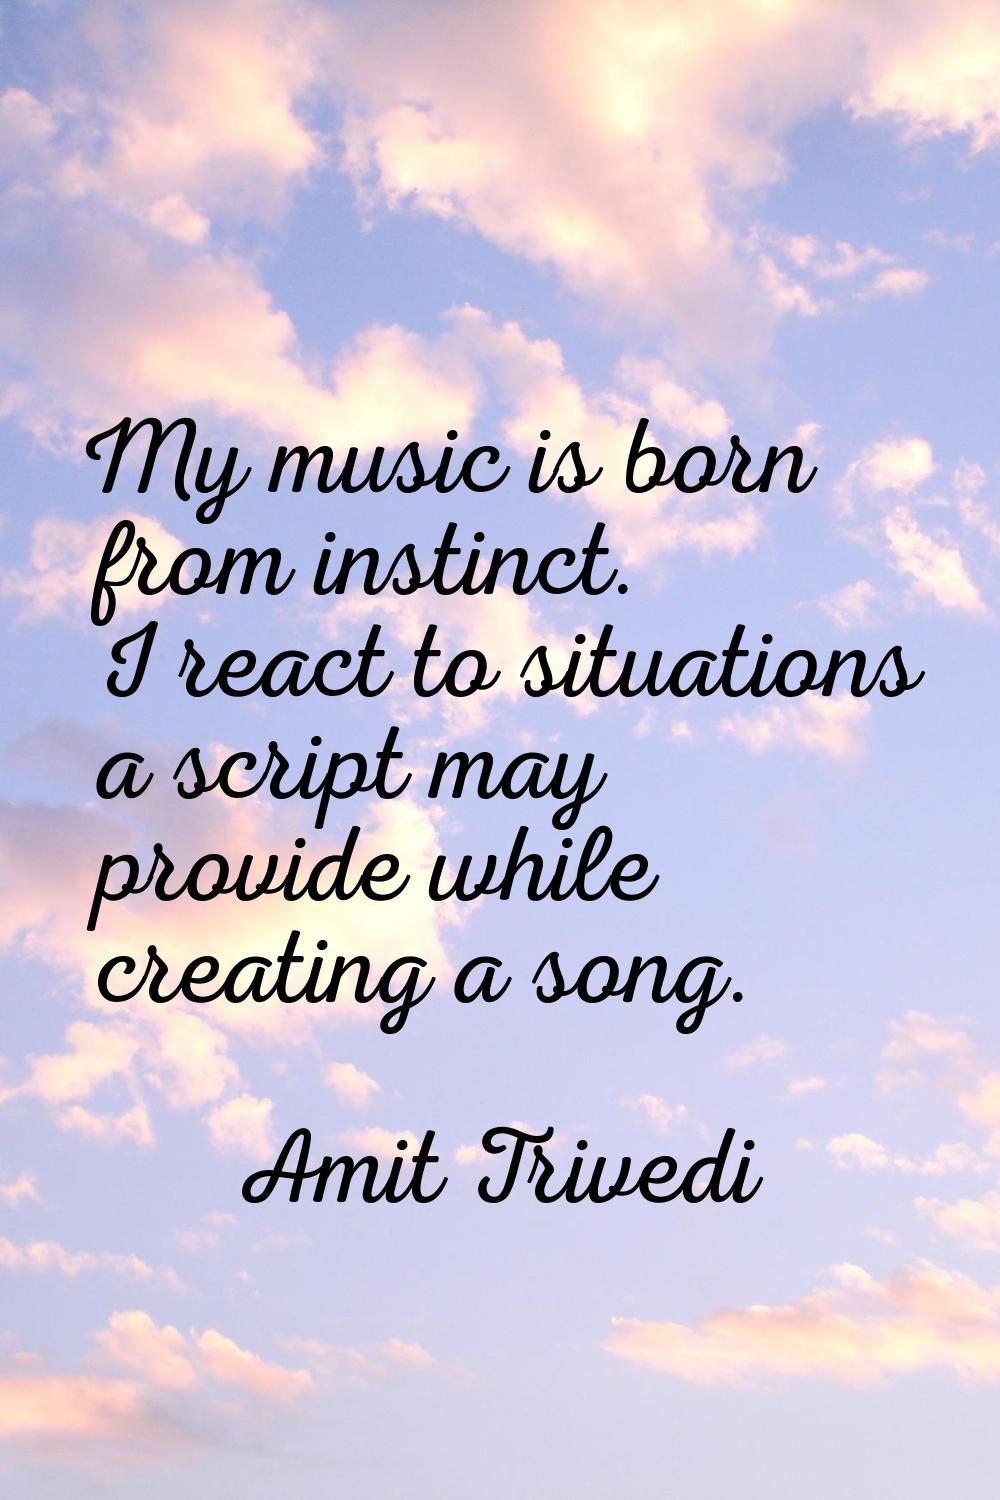 My music is born from instinct. I react to situations a script may provide while creating a song.